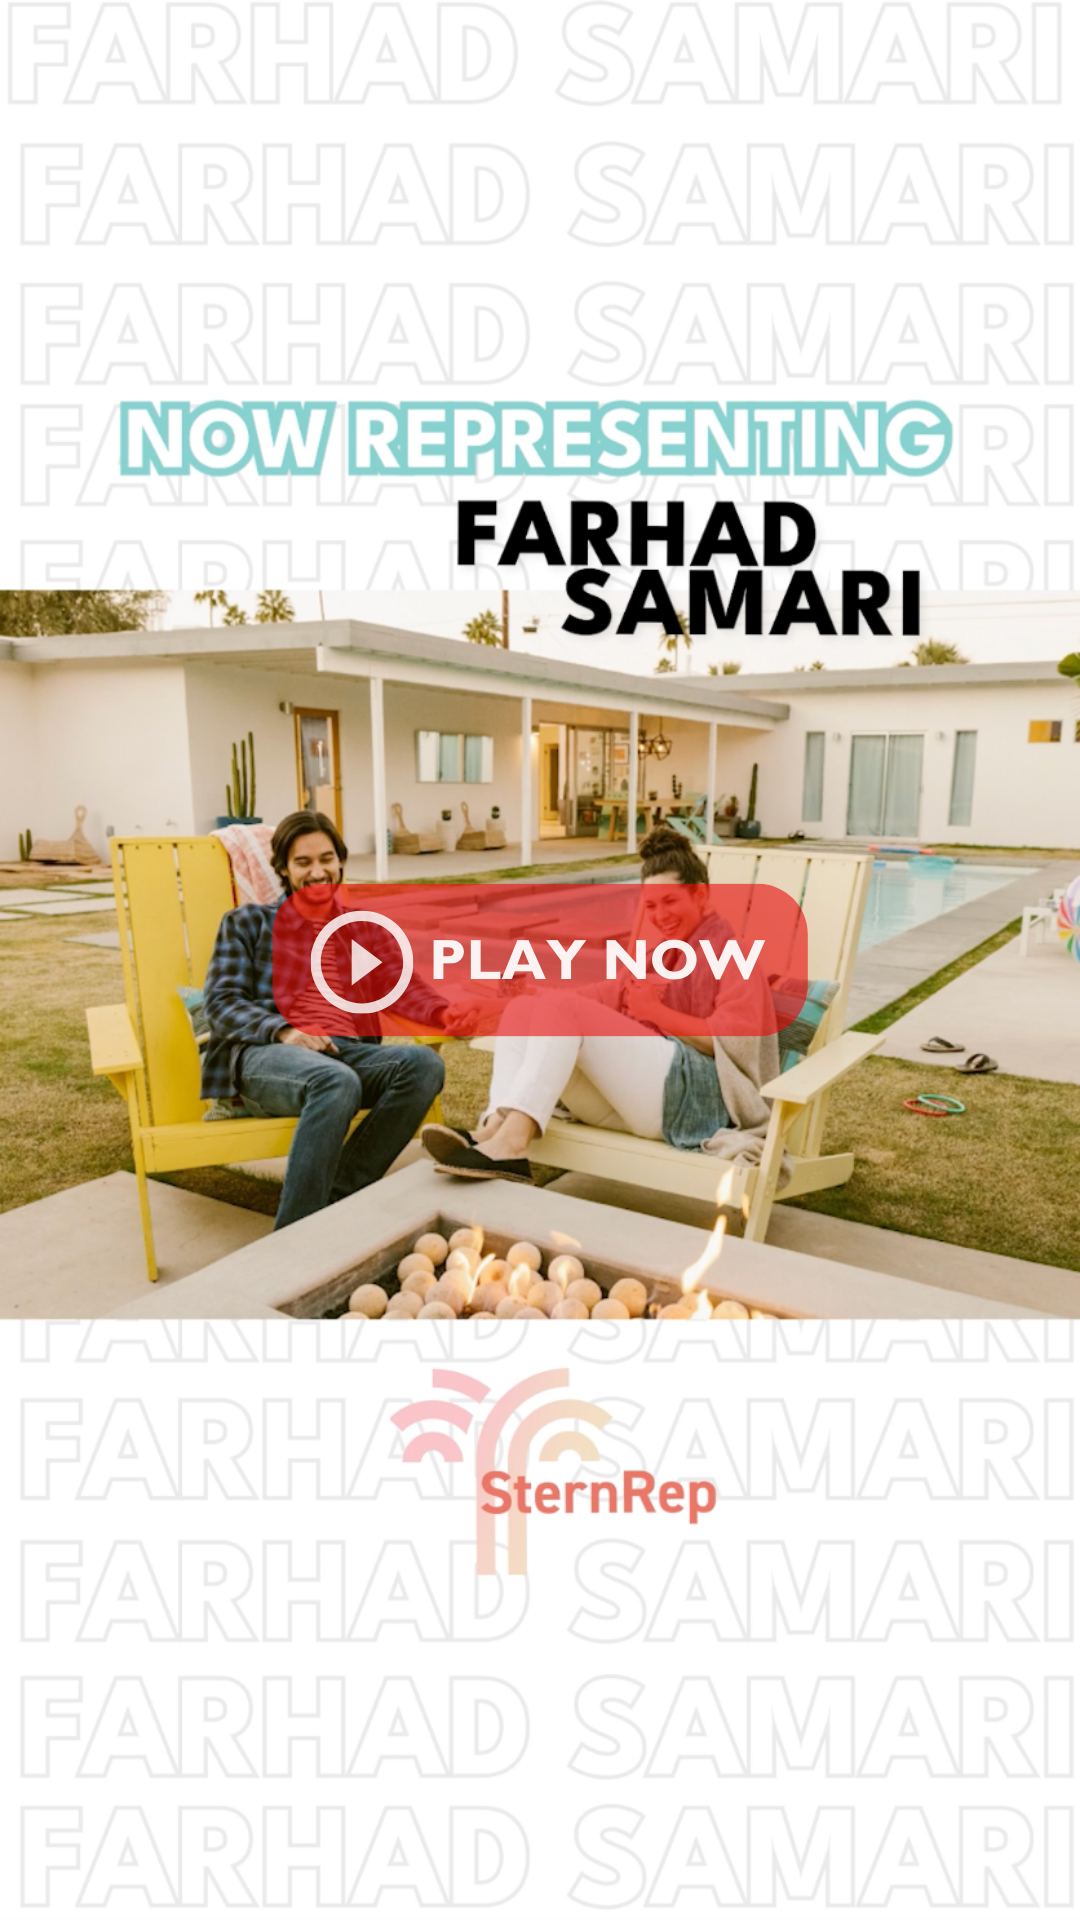 A screenshot of the cover art for a SternRep instagram reel featuring the work of lifestyle photographer Farhad Samari